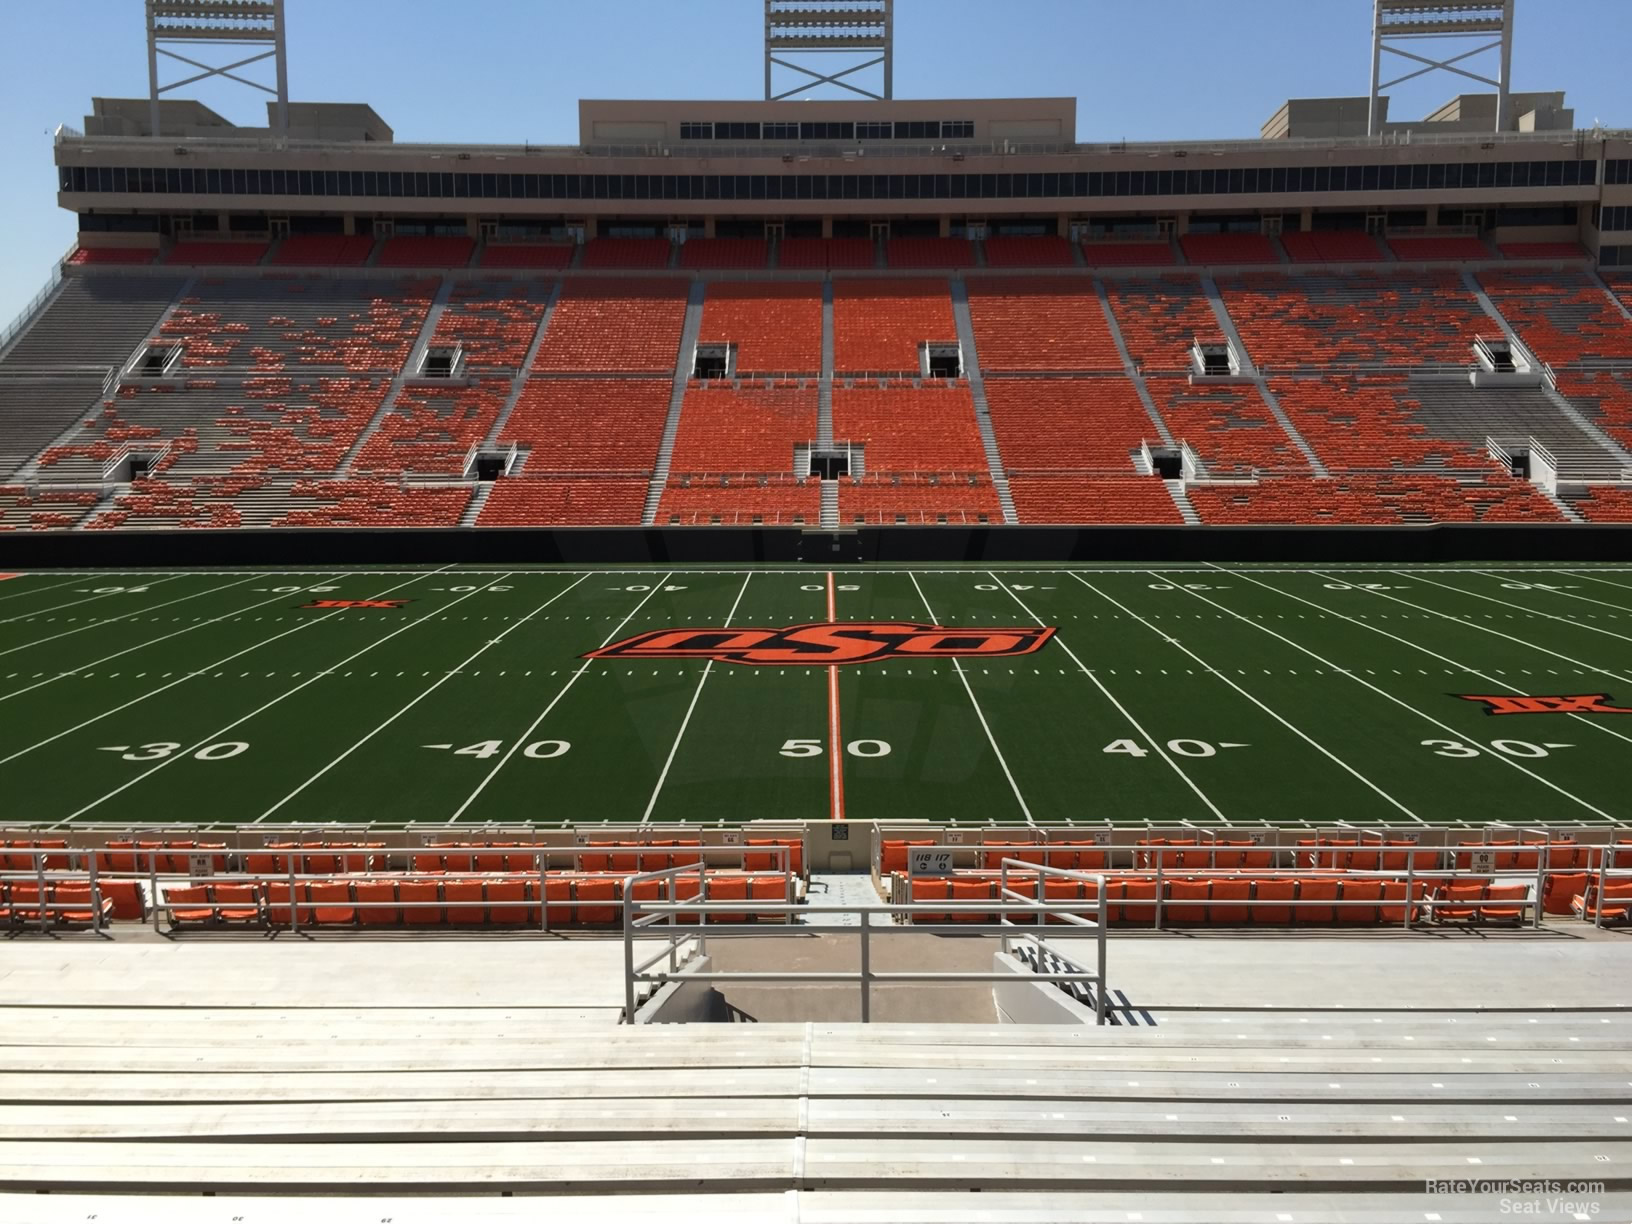 section 225, row 20 seat view  - boone pickens stadium